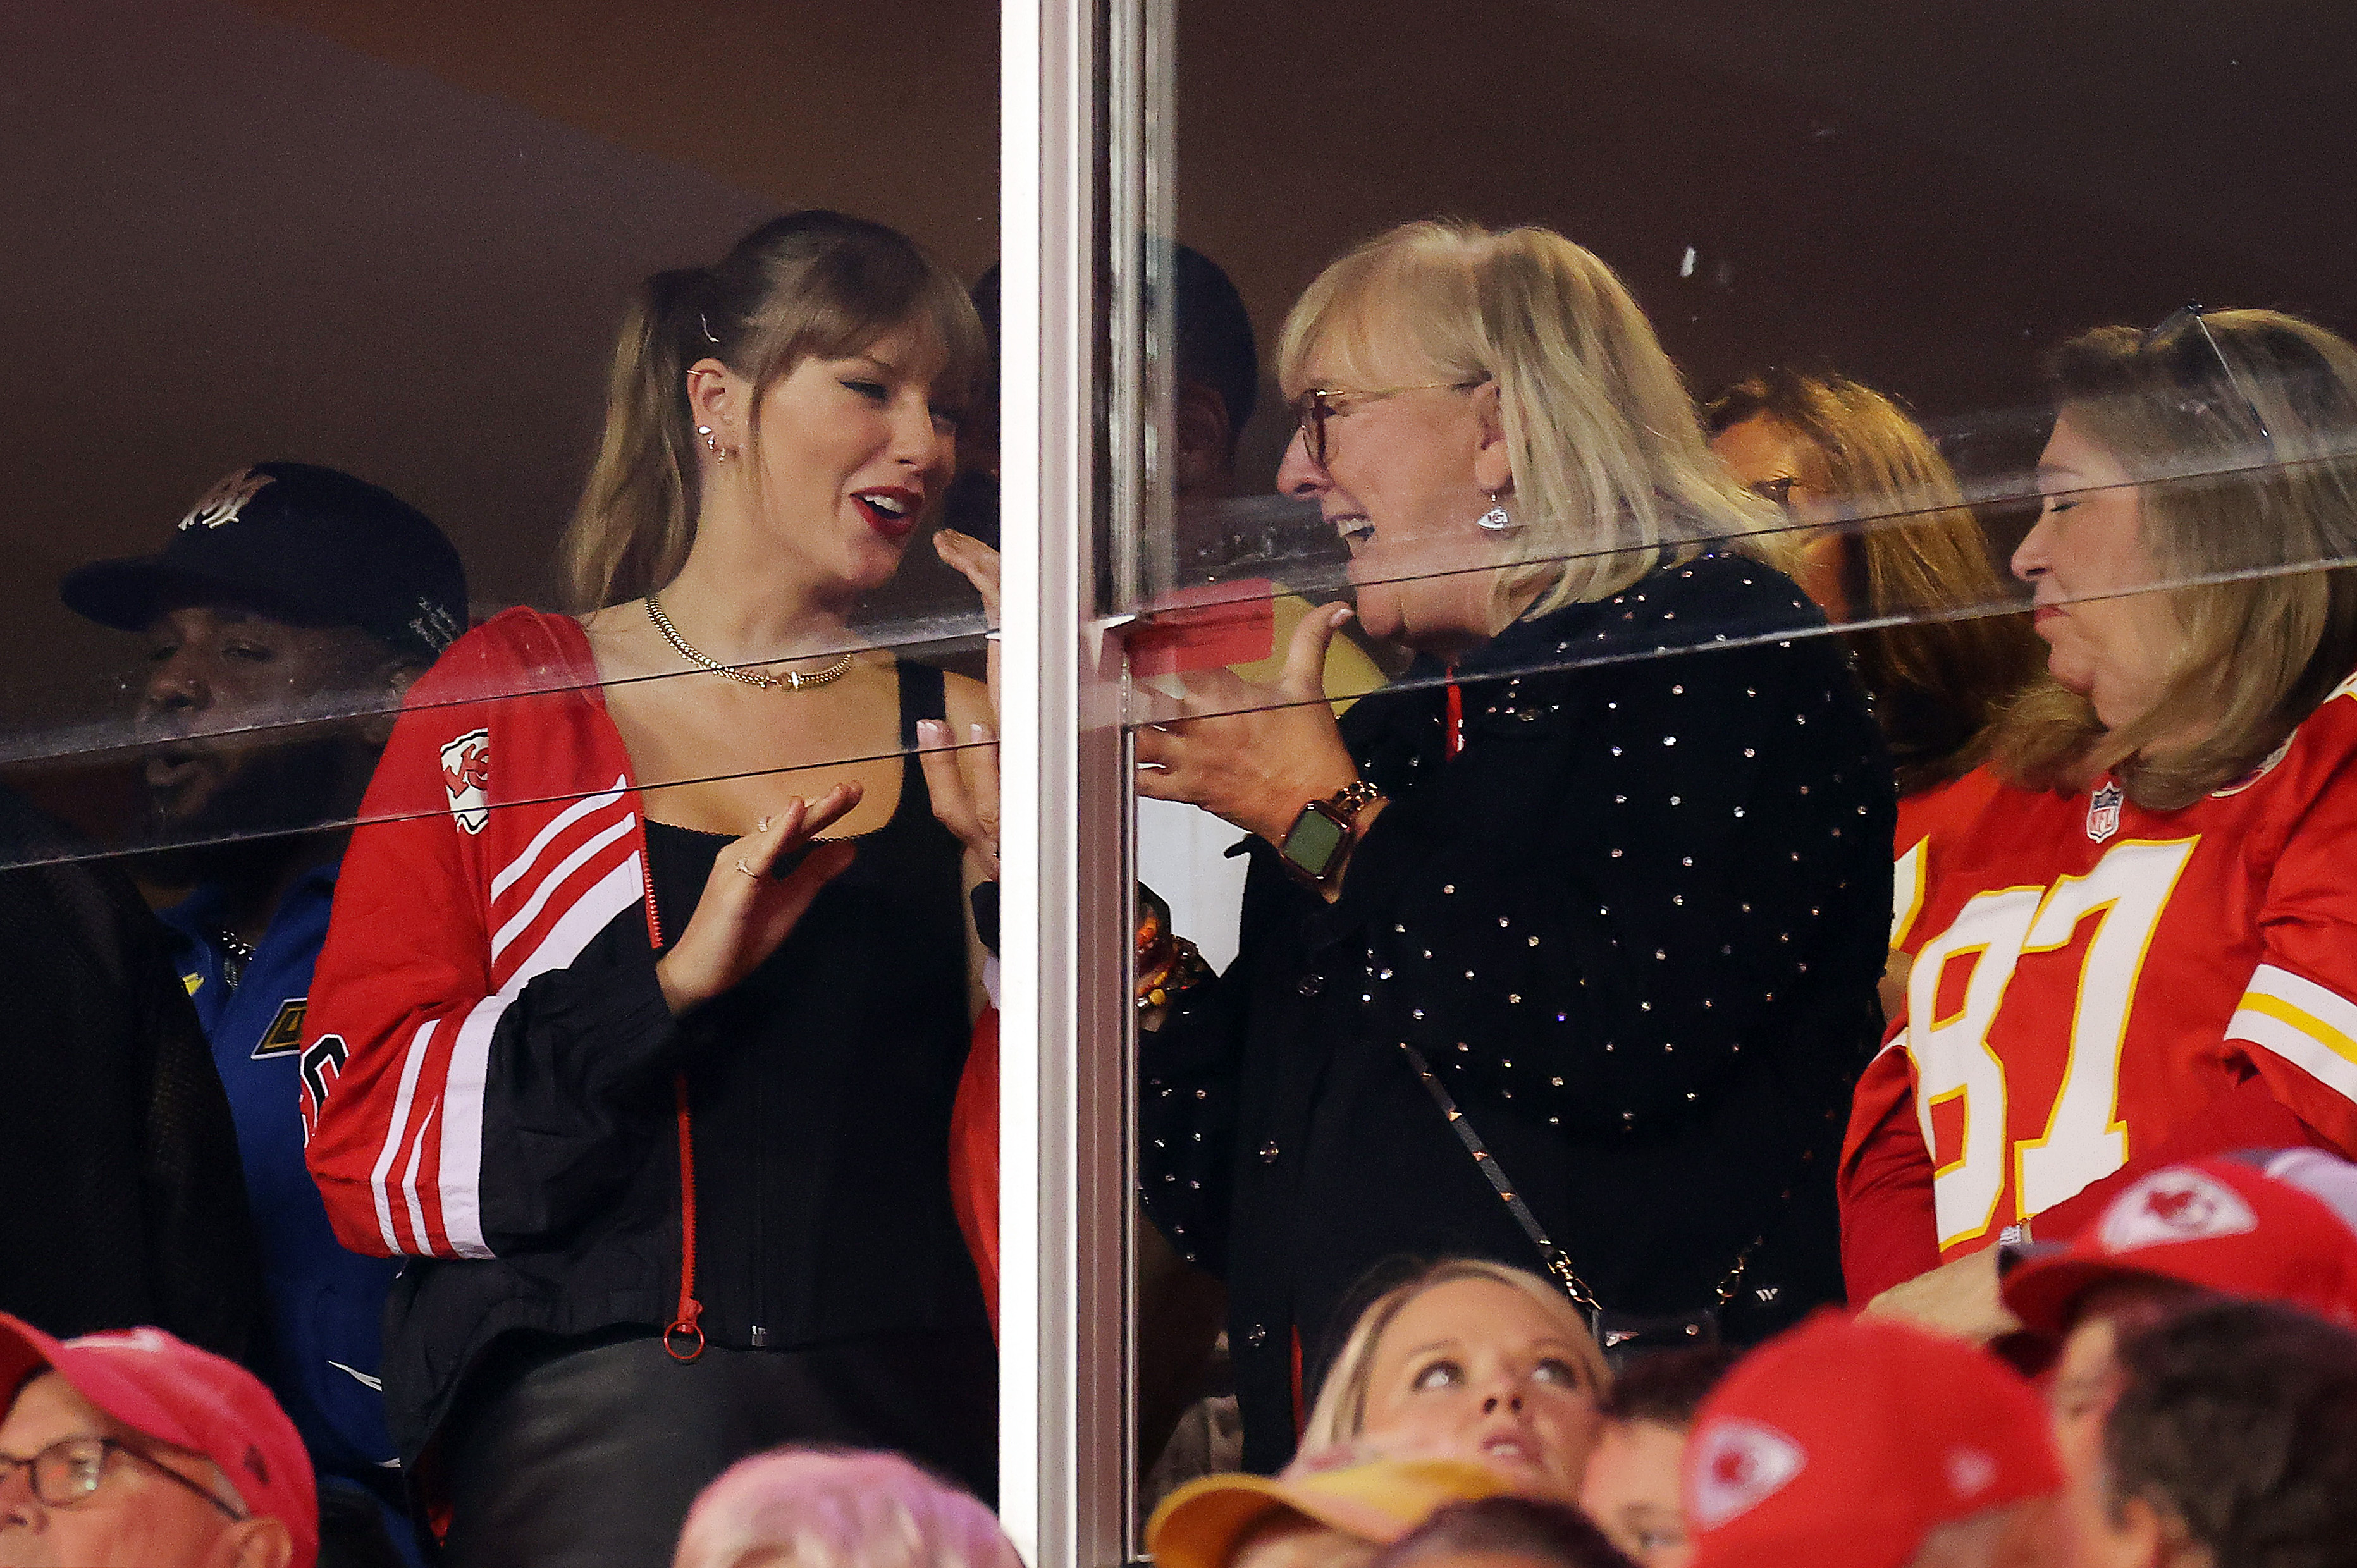 Taylor and her family also attended Travis' game on Christmas Day